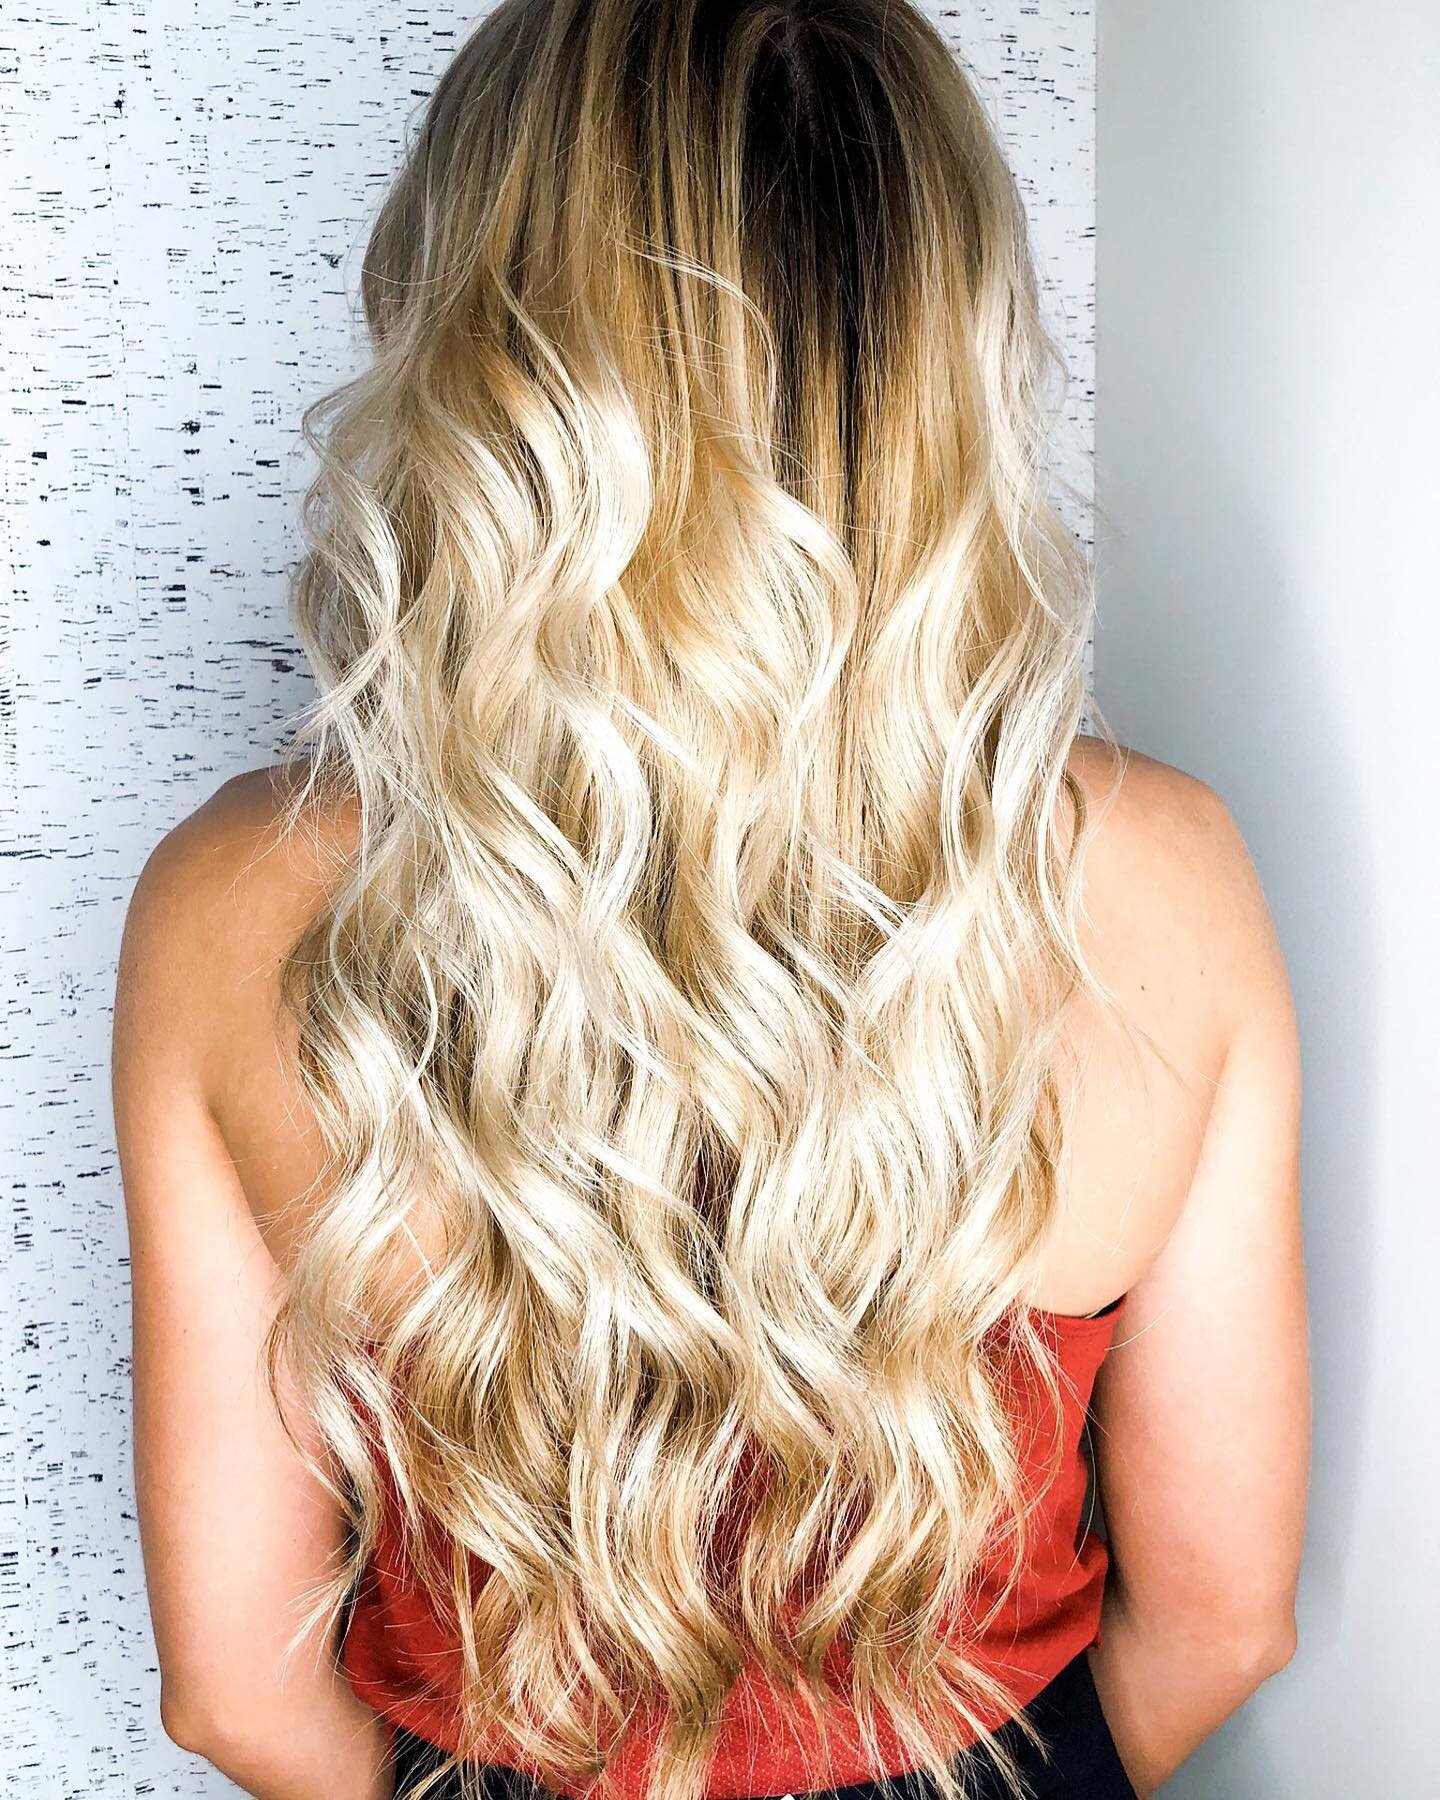 A 𝒃𝒂𝒍𝒂𝒚𝒂𝒈𝒆 𝒃𝒂𝒃𝒆 🌟 What&rsquo;s so great about balayage? There&rsquo;s so much more softness on the re-growth so your color will last LONGER! Balayage has so much dimension verses doing ombr&eacute; or foil highlights!
⠀⠀⠀⠀⠀⠀⠀⠀⠀⠀
Want to 